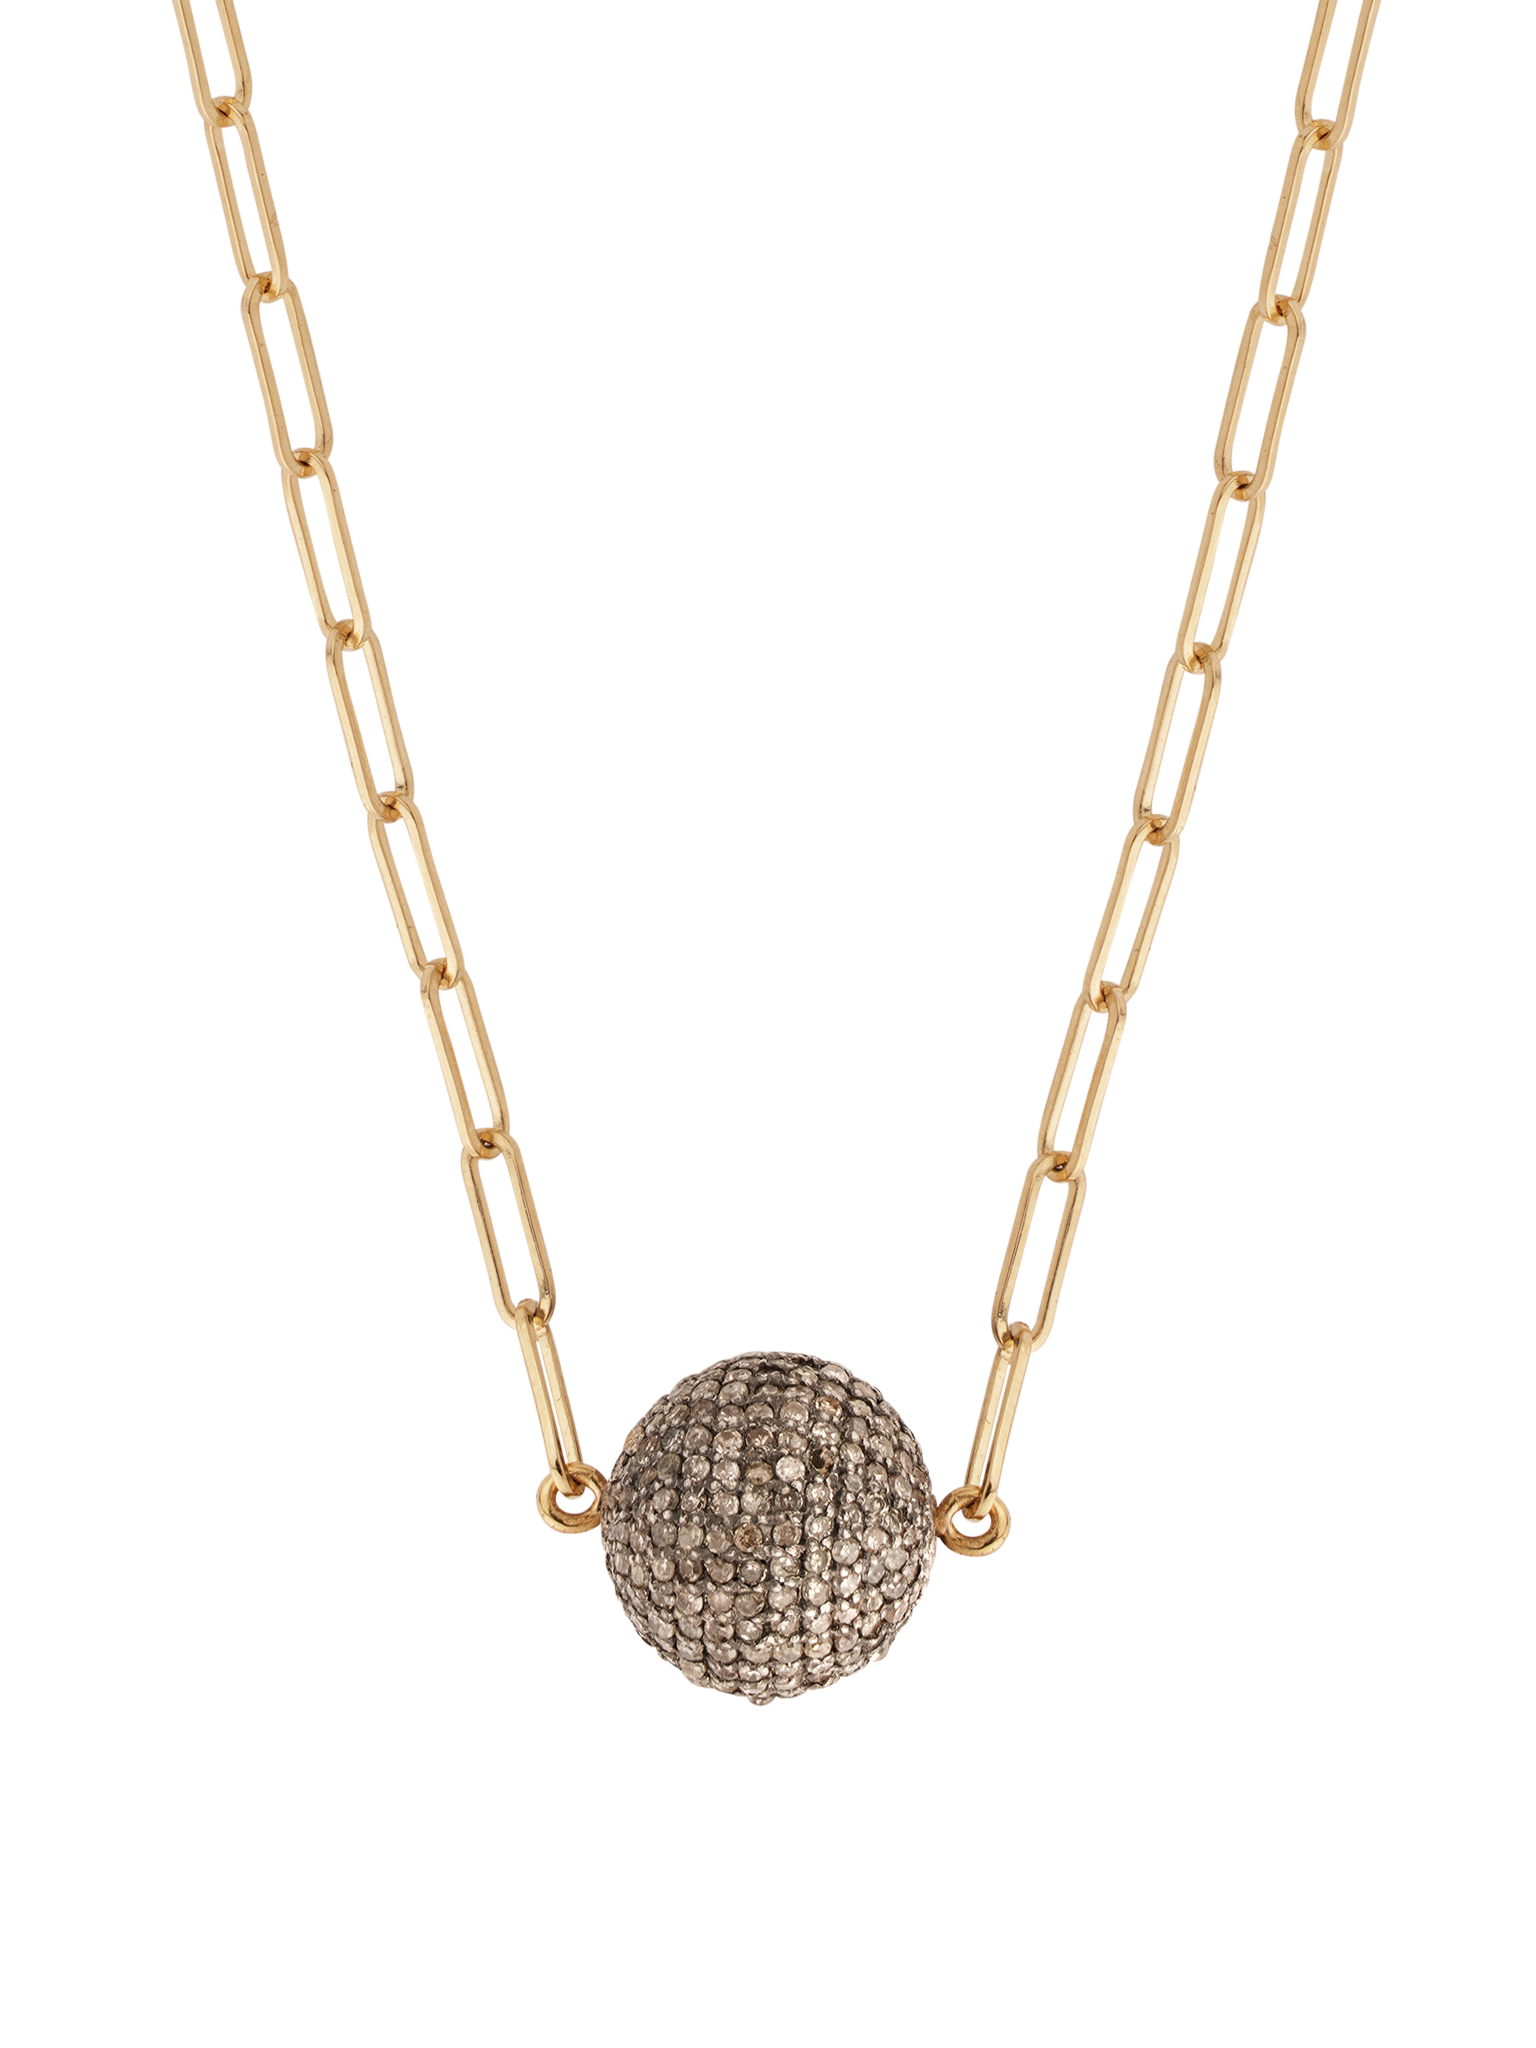 14k white gold and diamond chip ball on gold chain